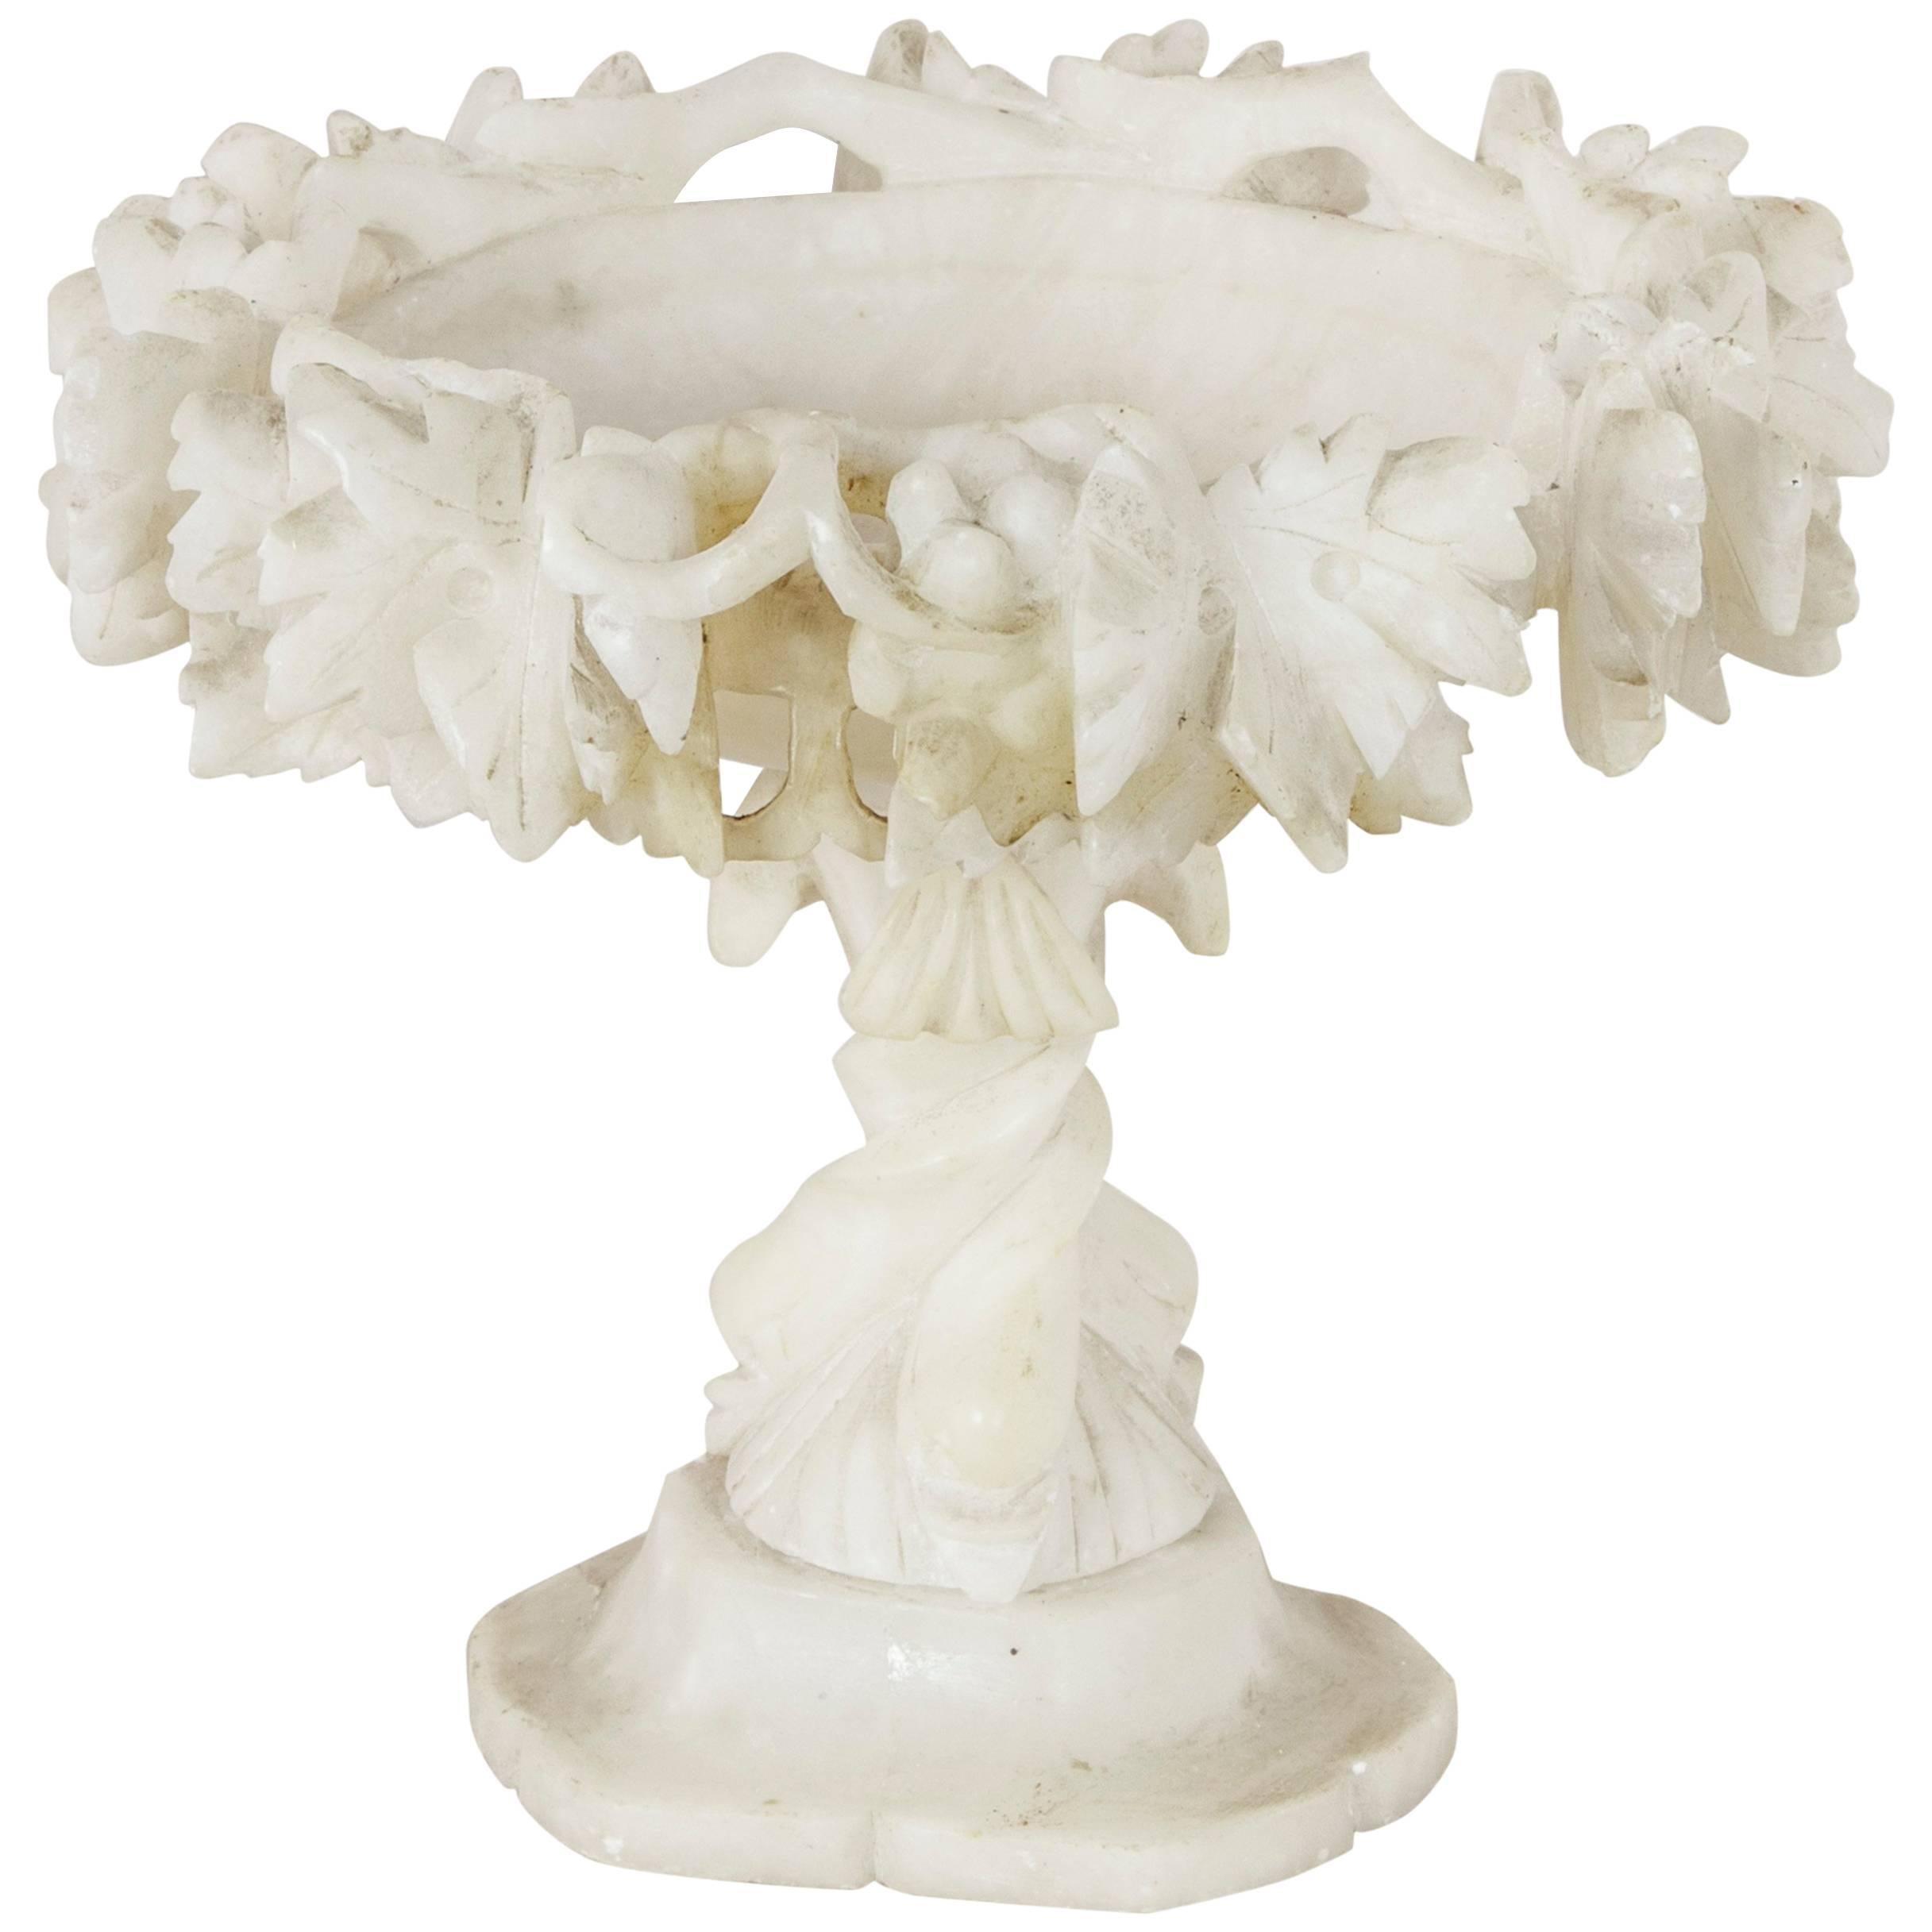 Late 19th Century French Hand-Carved Alabaster Compote or Pedestal Bowl